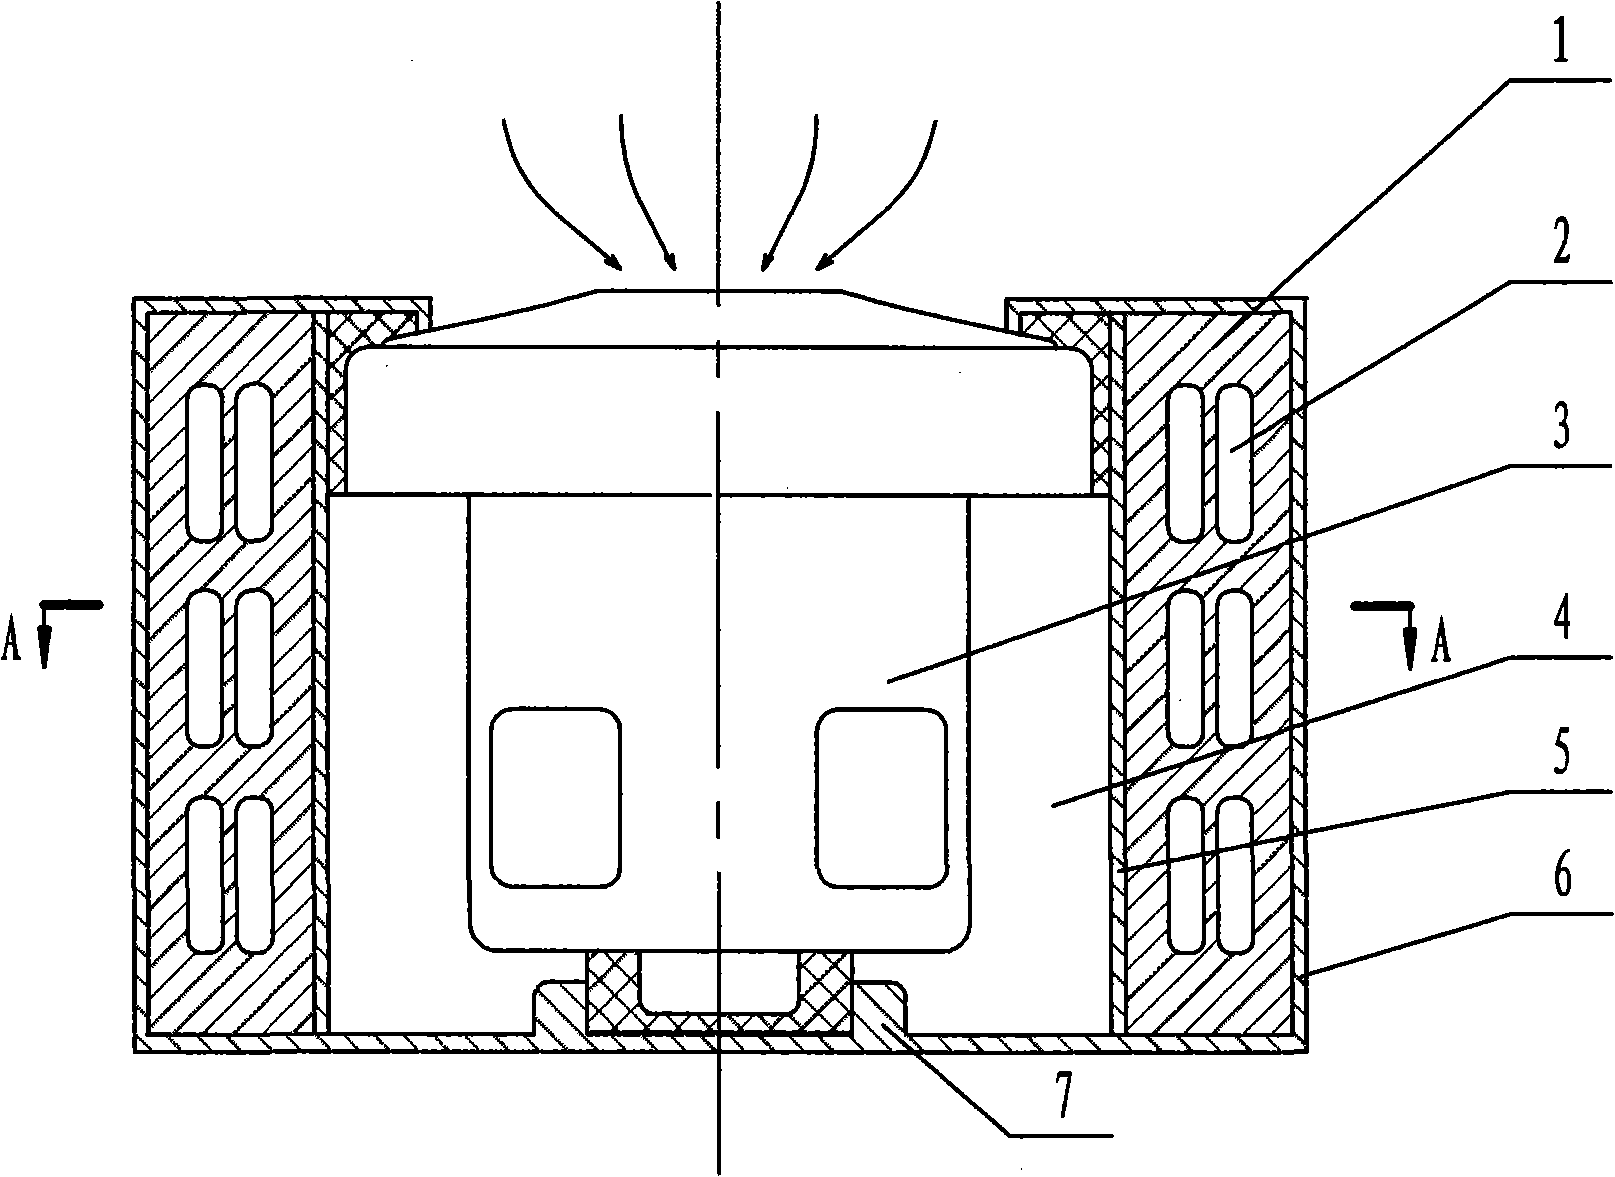 Cleaner multilevel noise reduction device